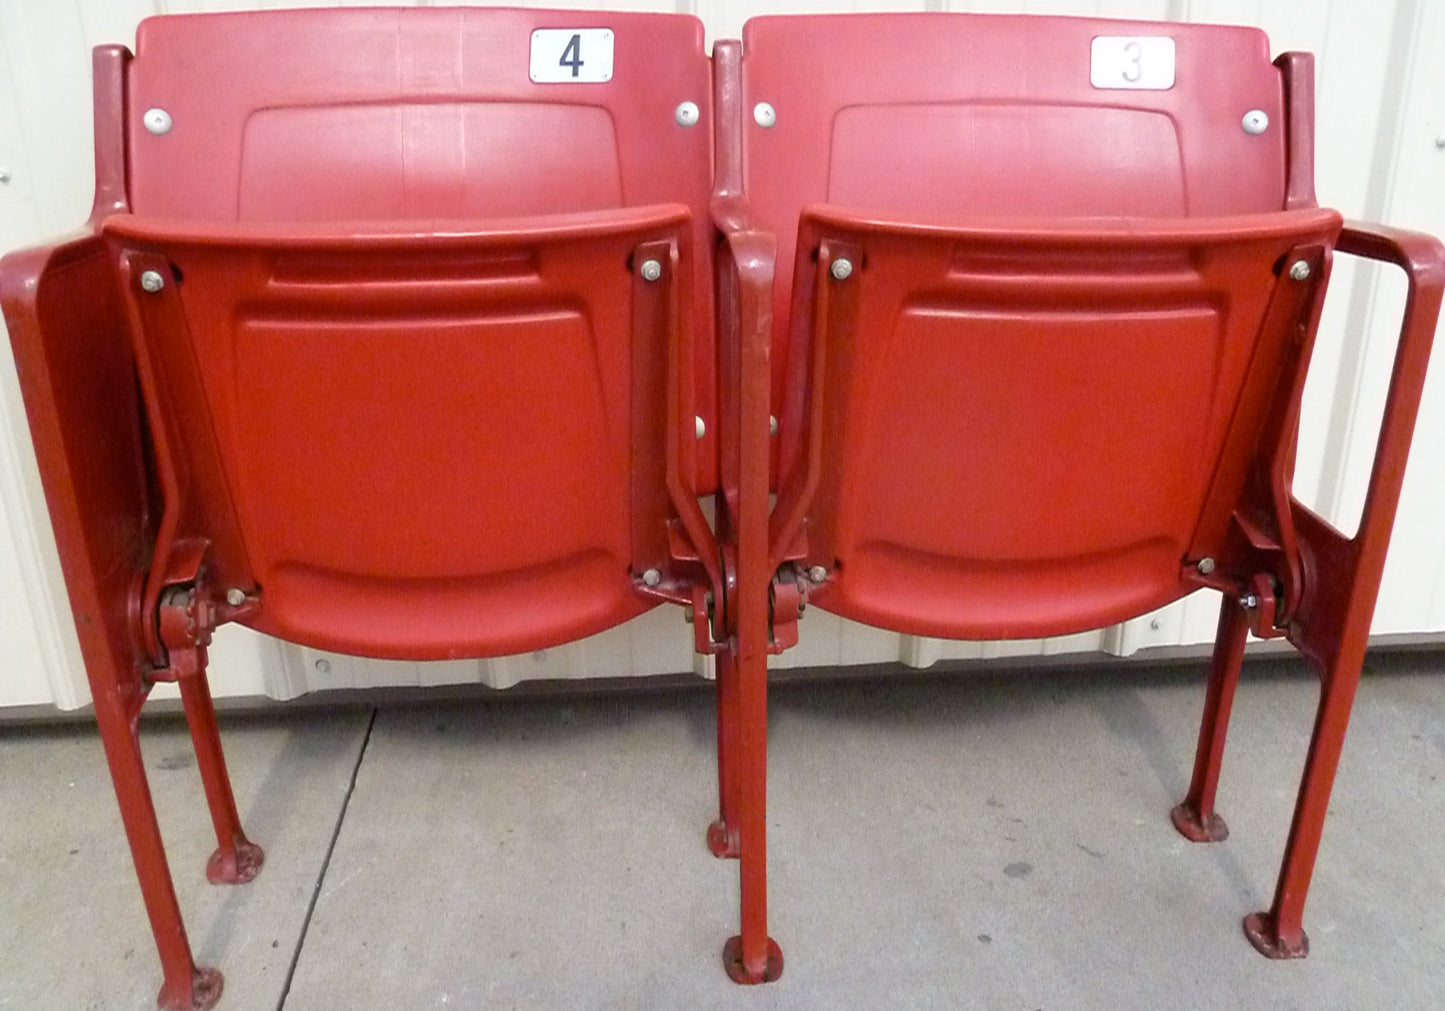 Busch Stadium - Refurbished and Repainted Condition